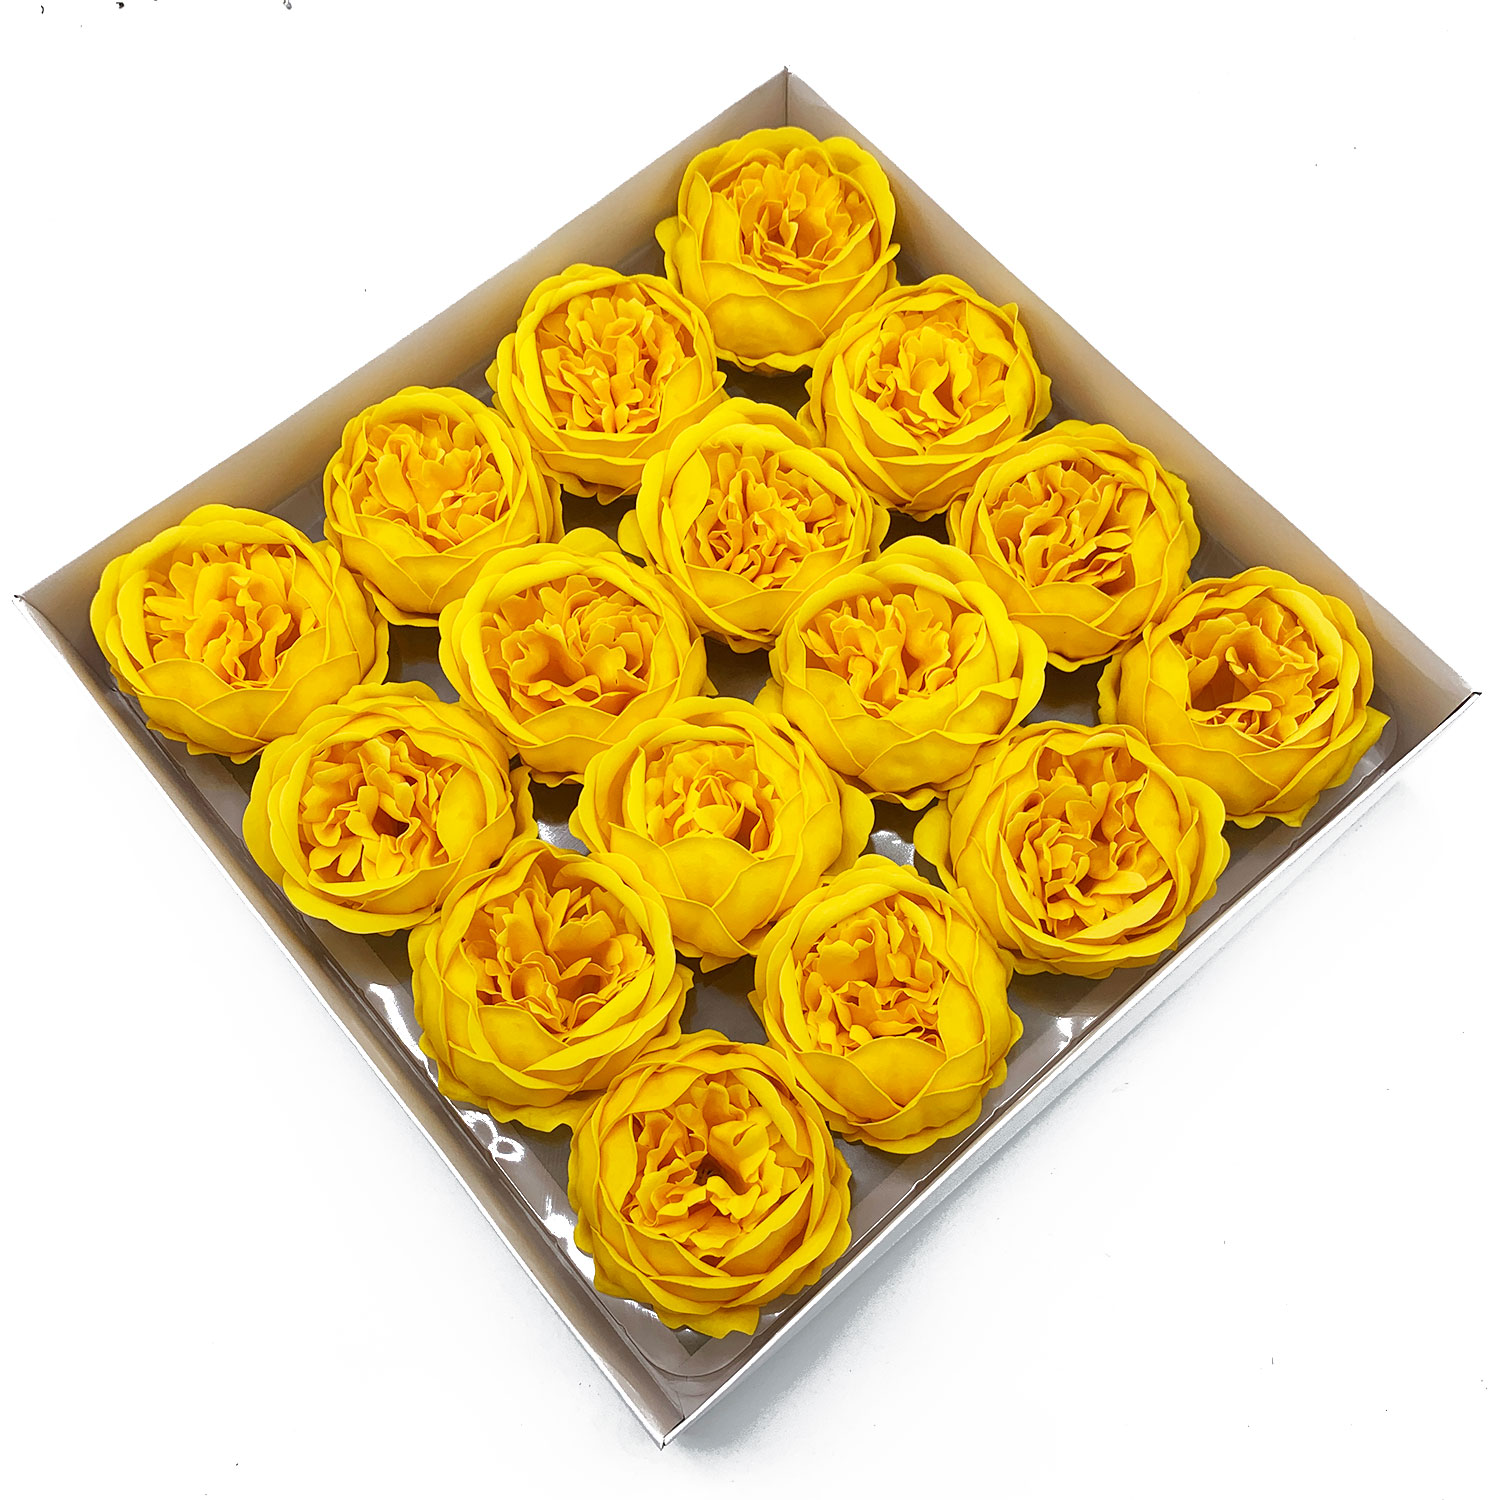 10 x Craft Soap Flowers - Ext Large Peony - Yellow